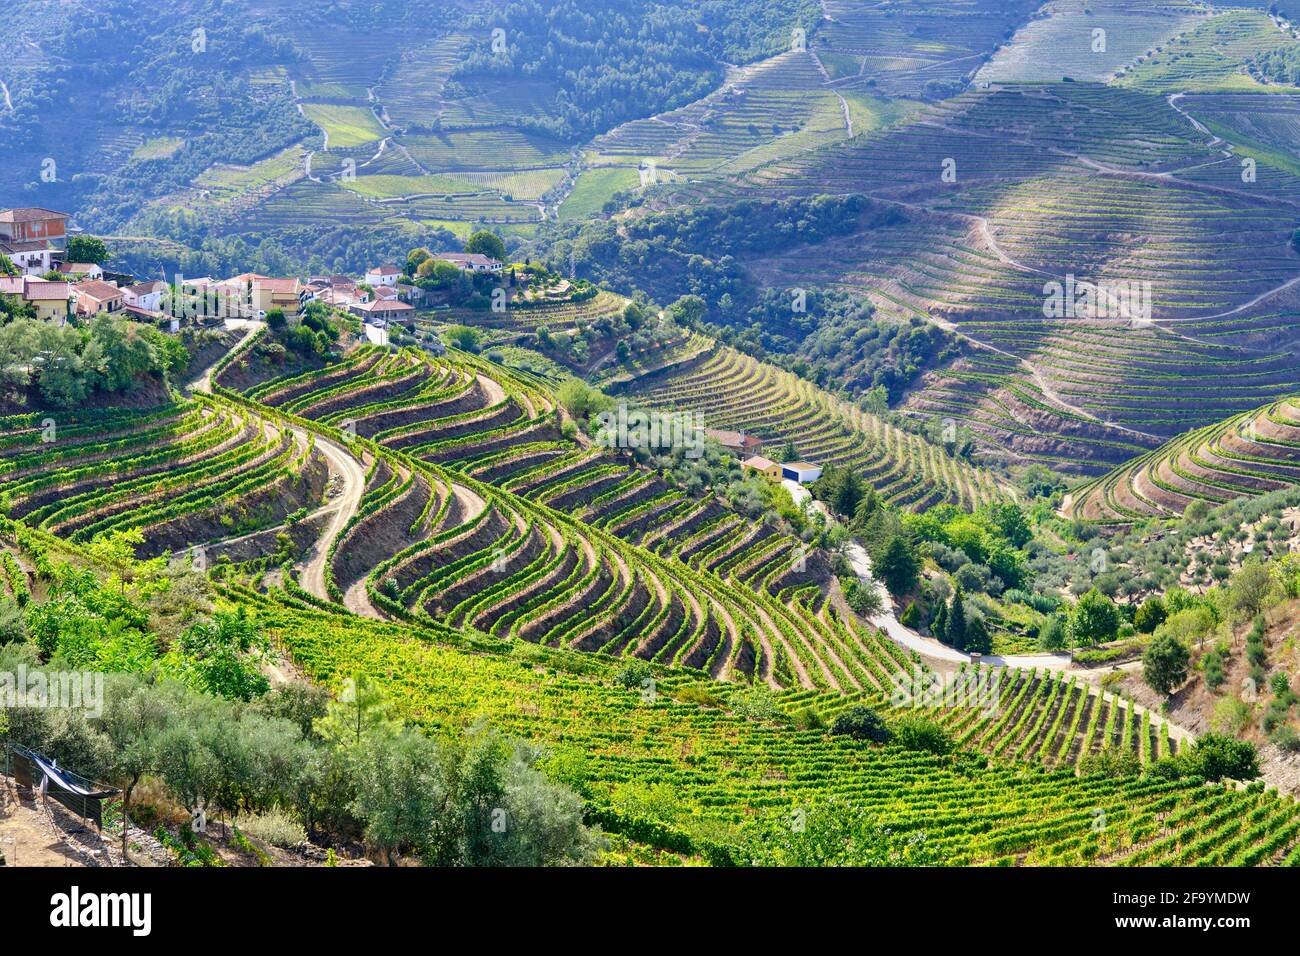 Vale de Mendiz, a valley spreading along the road from Alijo to Pinhao, is full of vineyards to produce the world famous Port wine and the Douro wine. Stock Photo